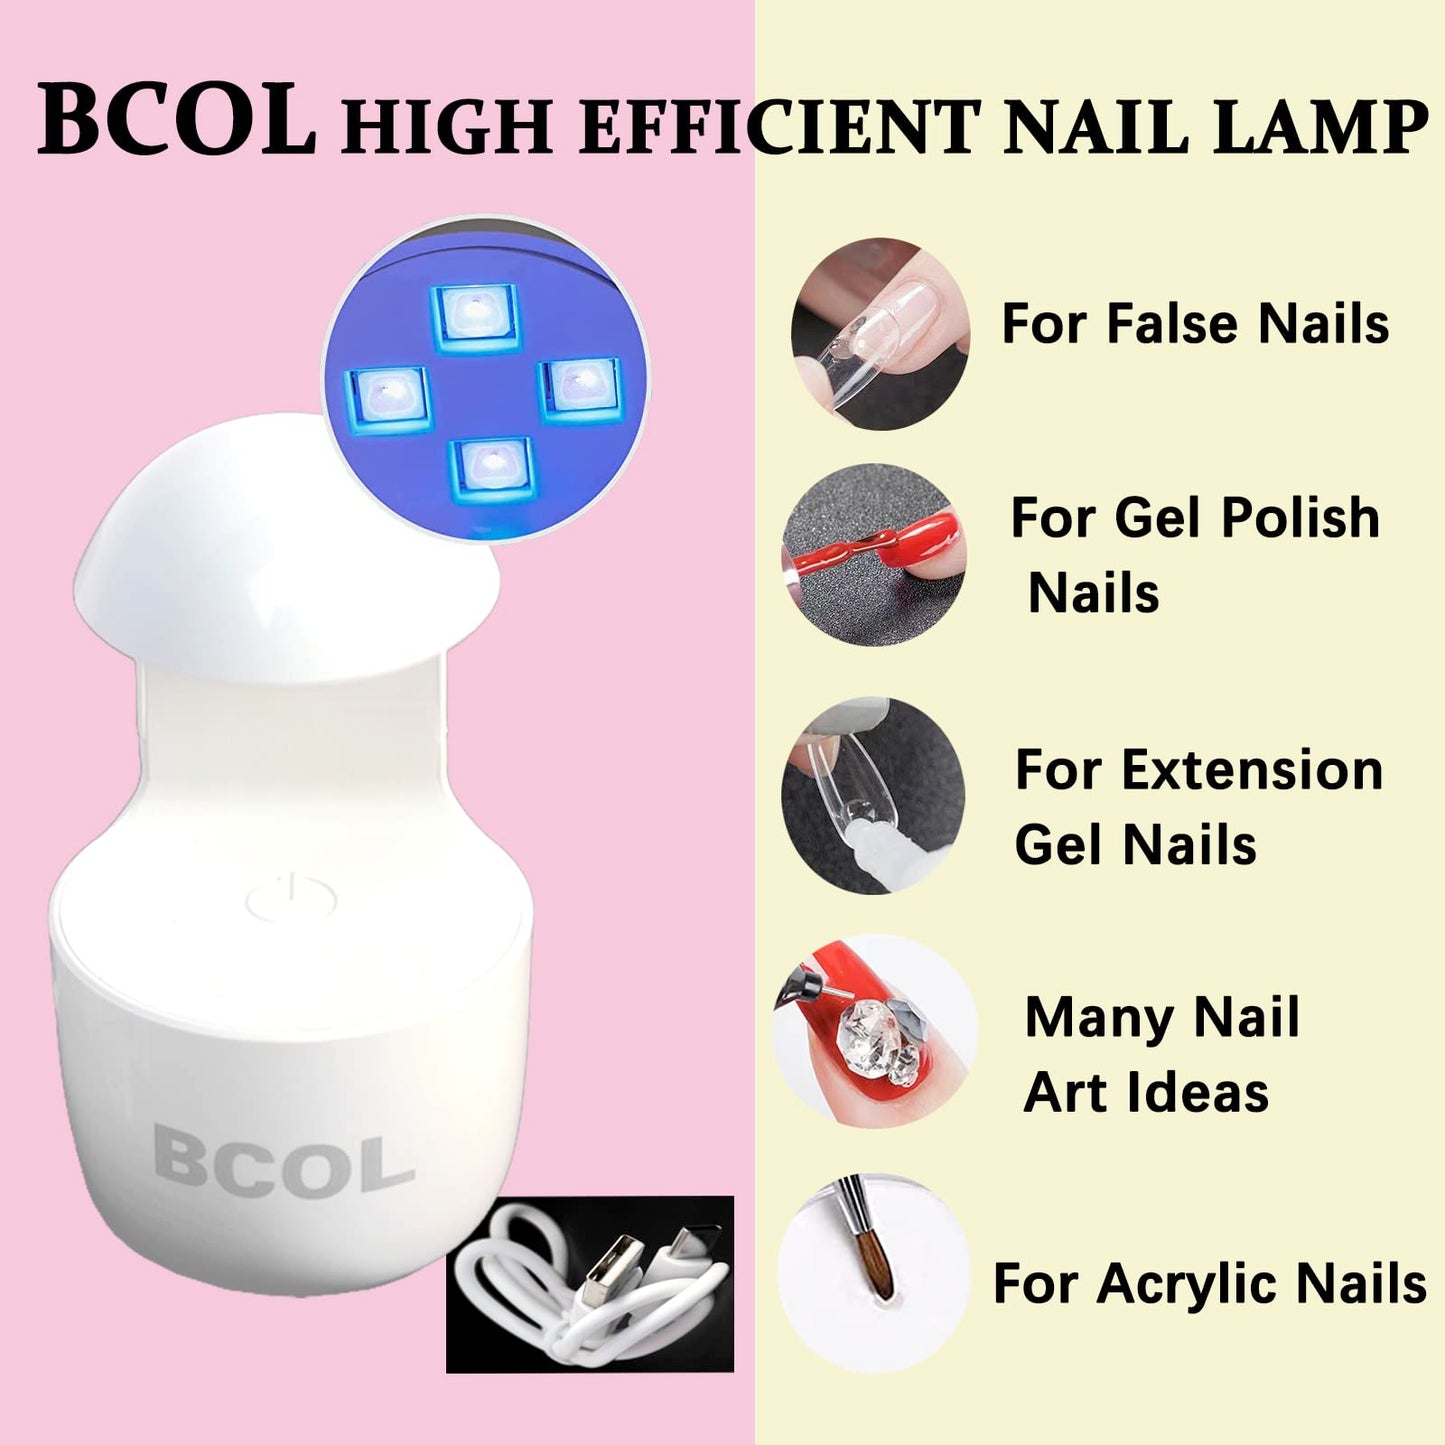 BCOL Nail Tips and Glue Gel Nail Kit, 2 In 1 Nail Gel and Base Gel with 500Pcs Coffin Nails and Innovative UV LED Nail Lamp for Gel Art Liner Polish Extension Different Nail Art Nails DIY Home Gifts